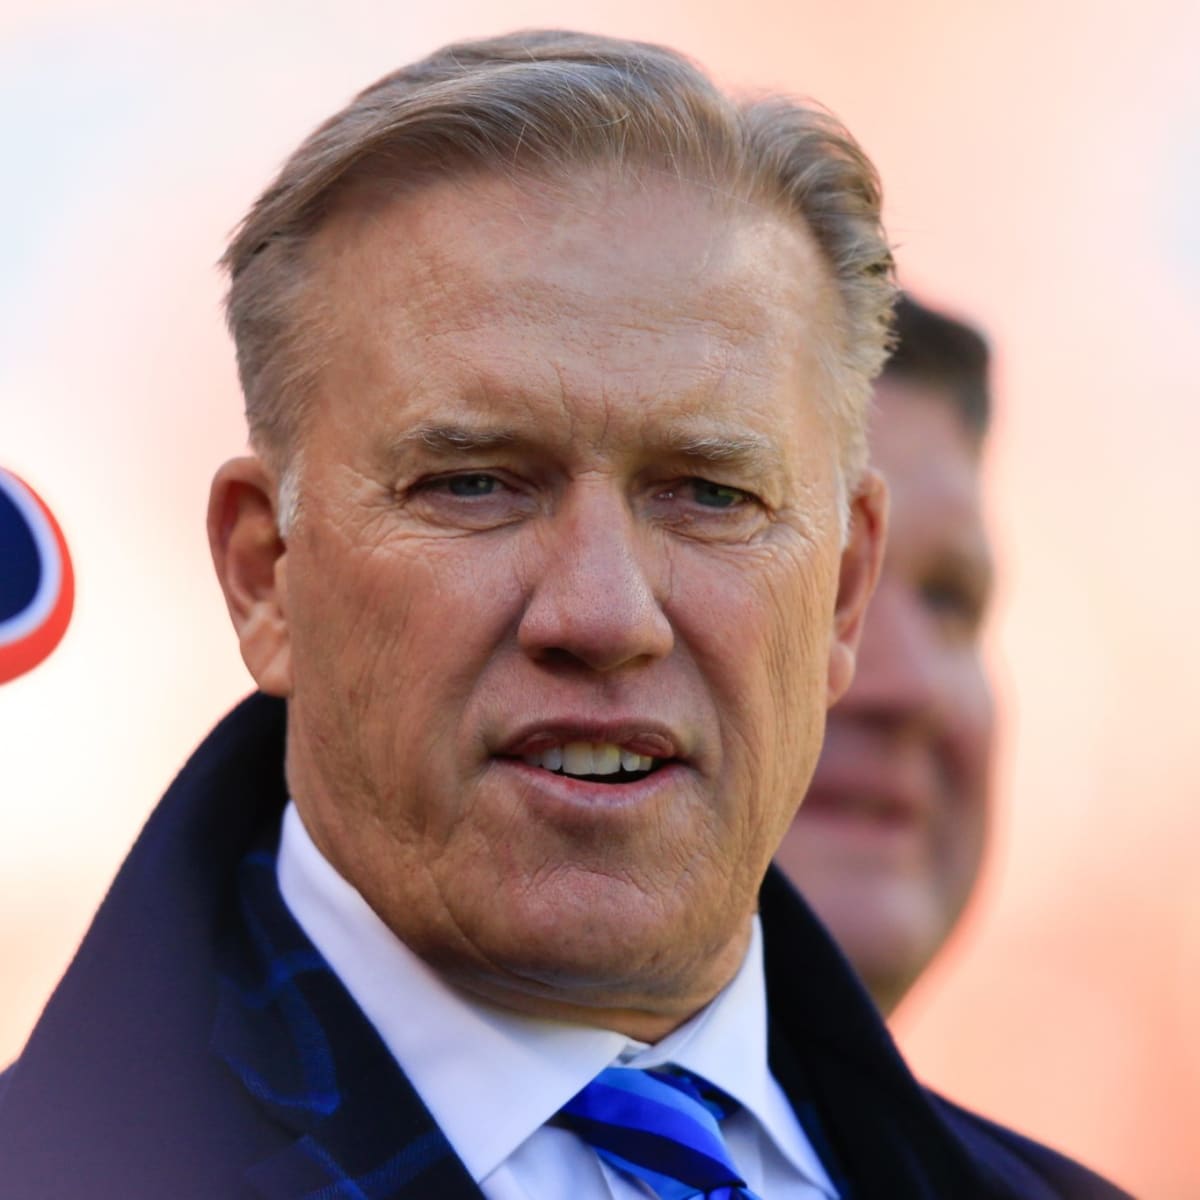 John Elway desires to be part of the Denver Broncos with future